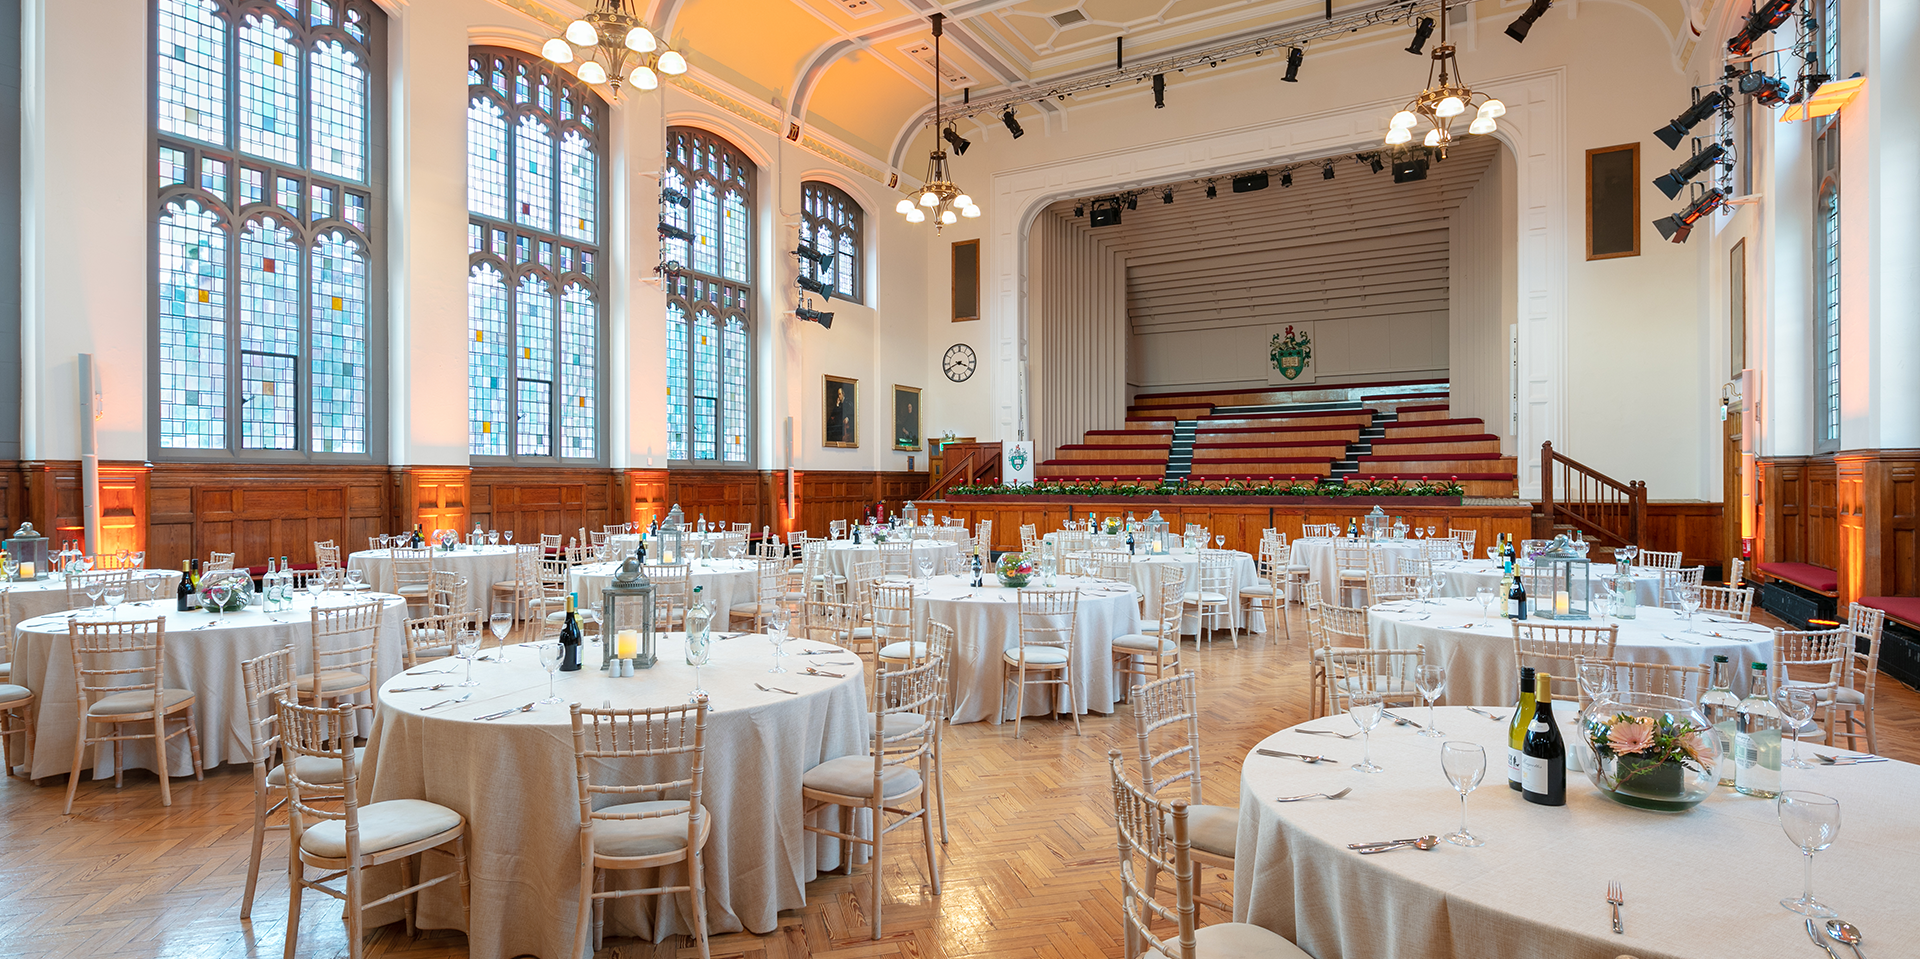 Private event in the Great Hall